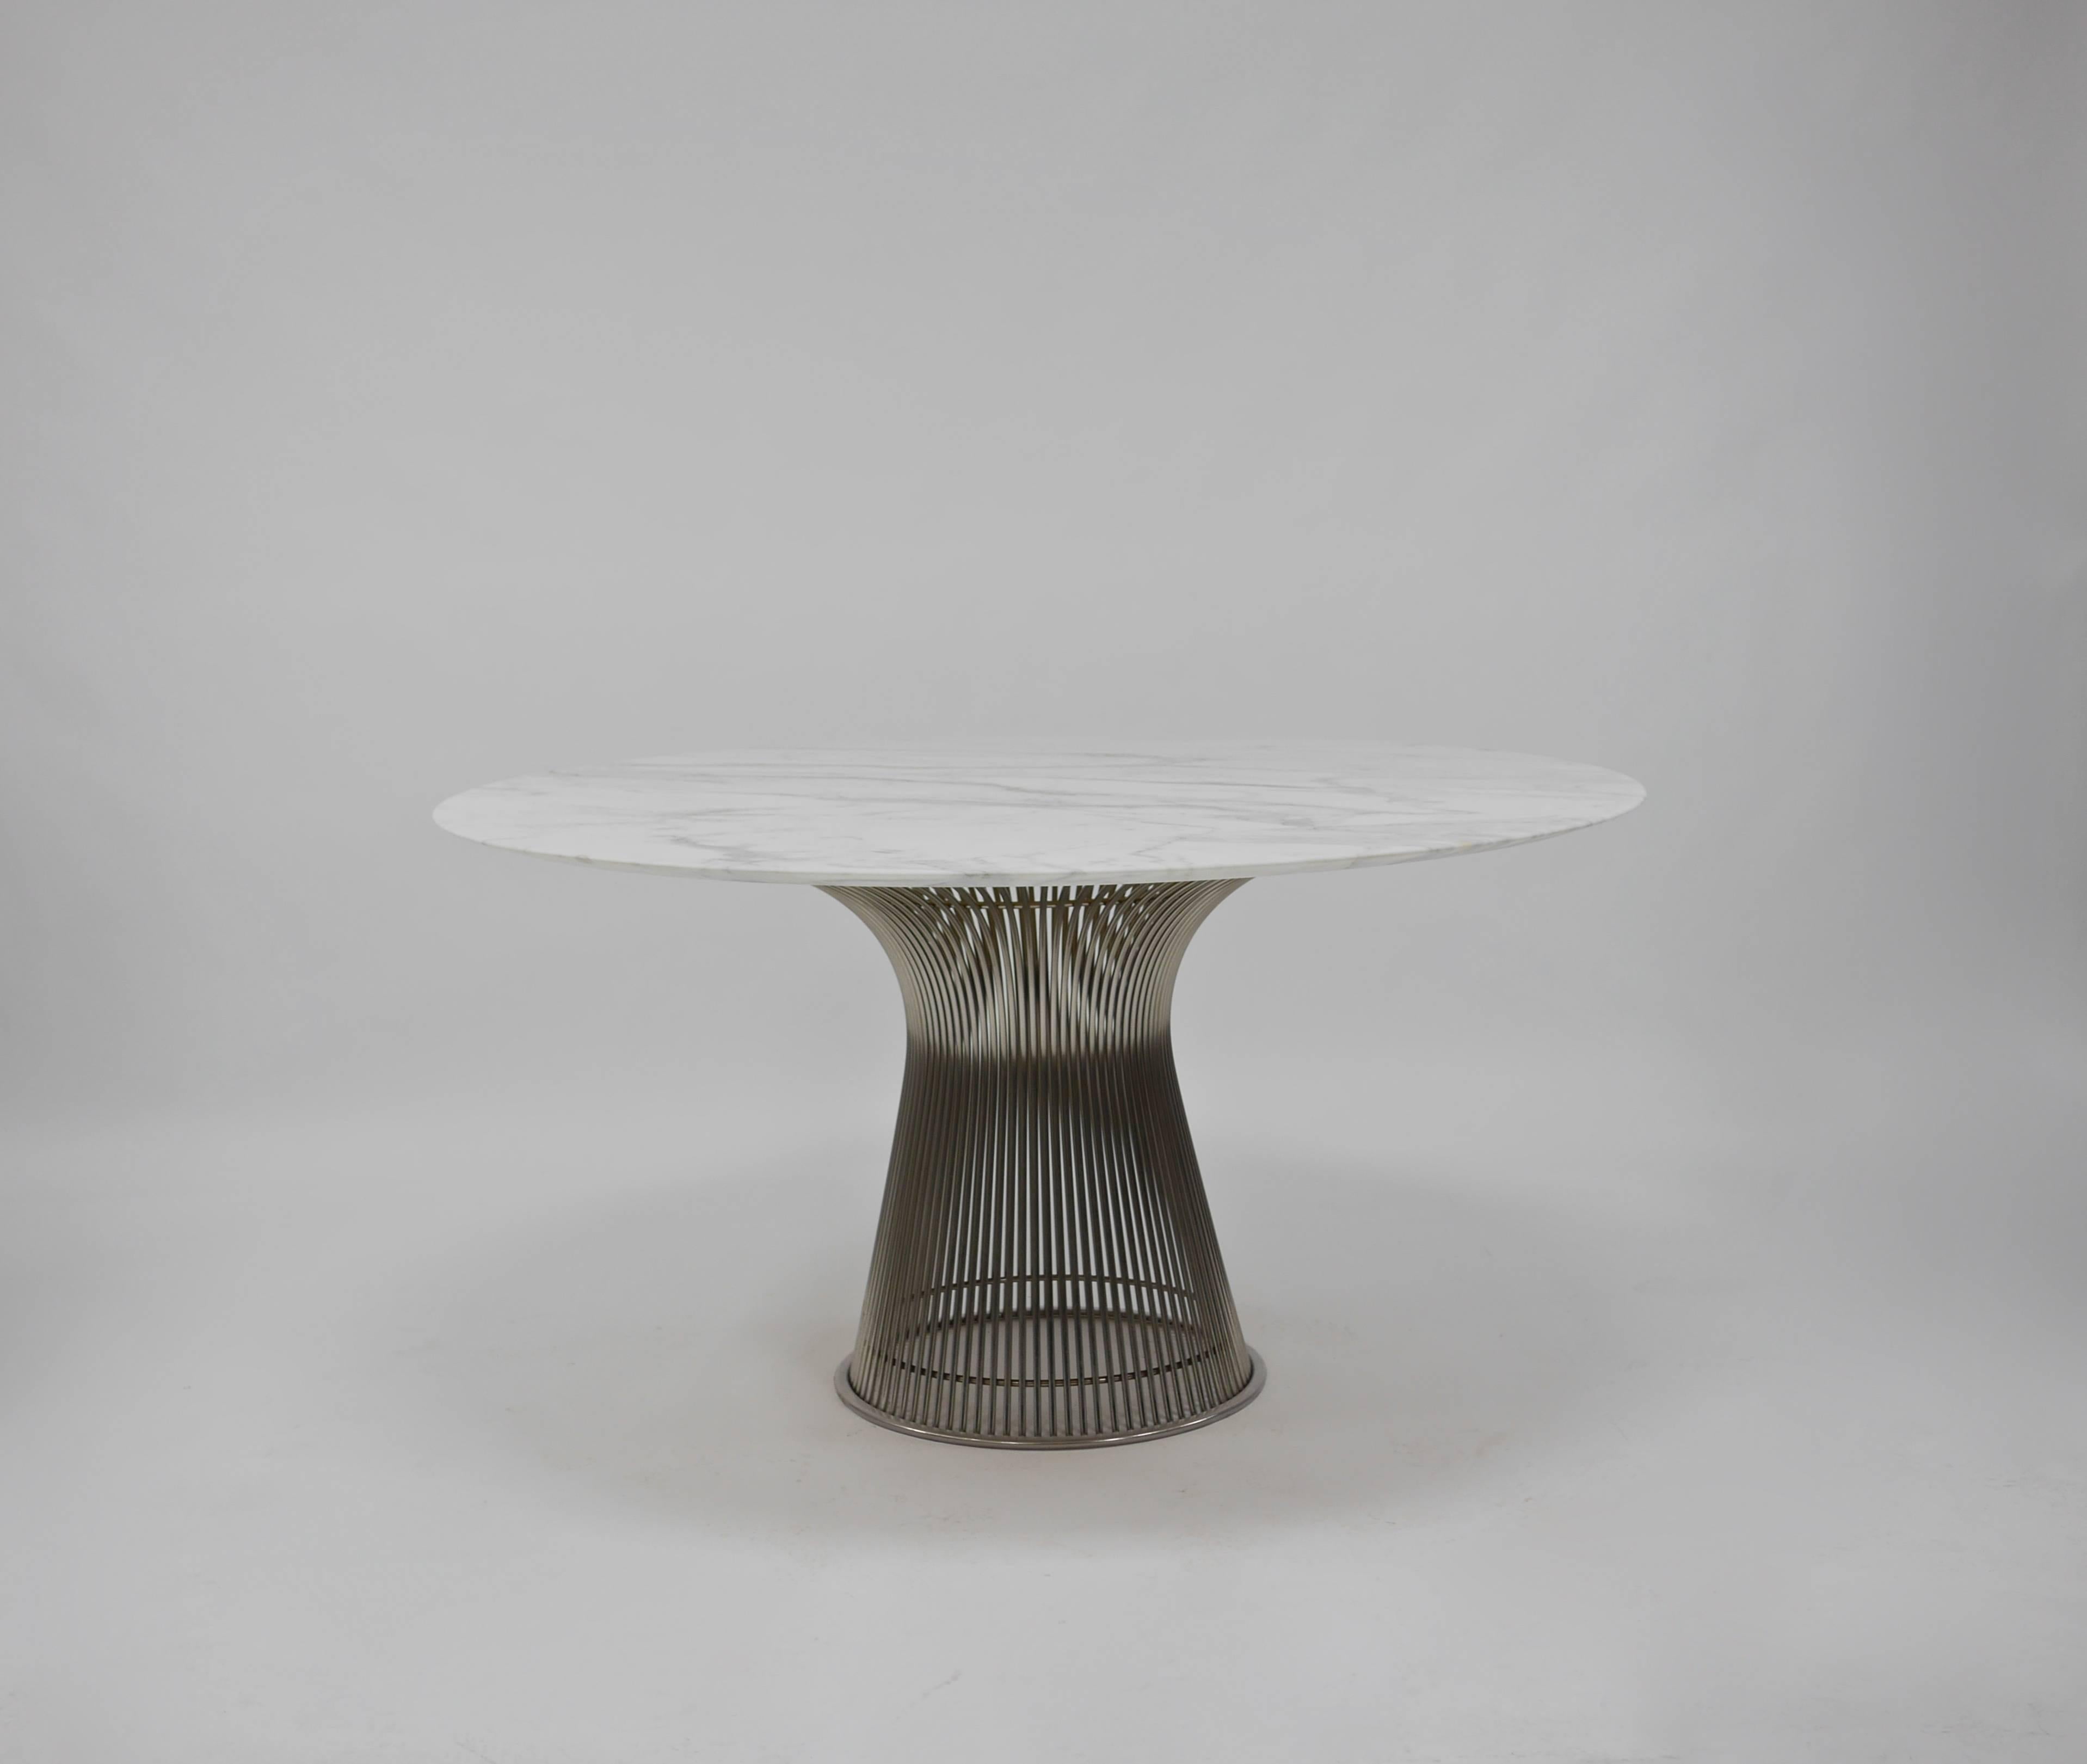 Vintage marble dining table by Warren Platner for Knoll. Professionally honed and sealed Calacutta Gold Marble top. Nickel-plated steel base. Marked Knoll, circa 1960s.
Top has been professionally re honed to a matte finish and sealed. Free of